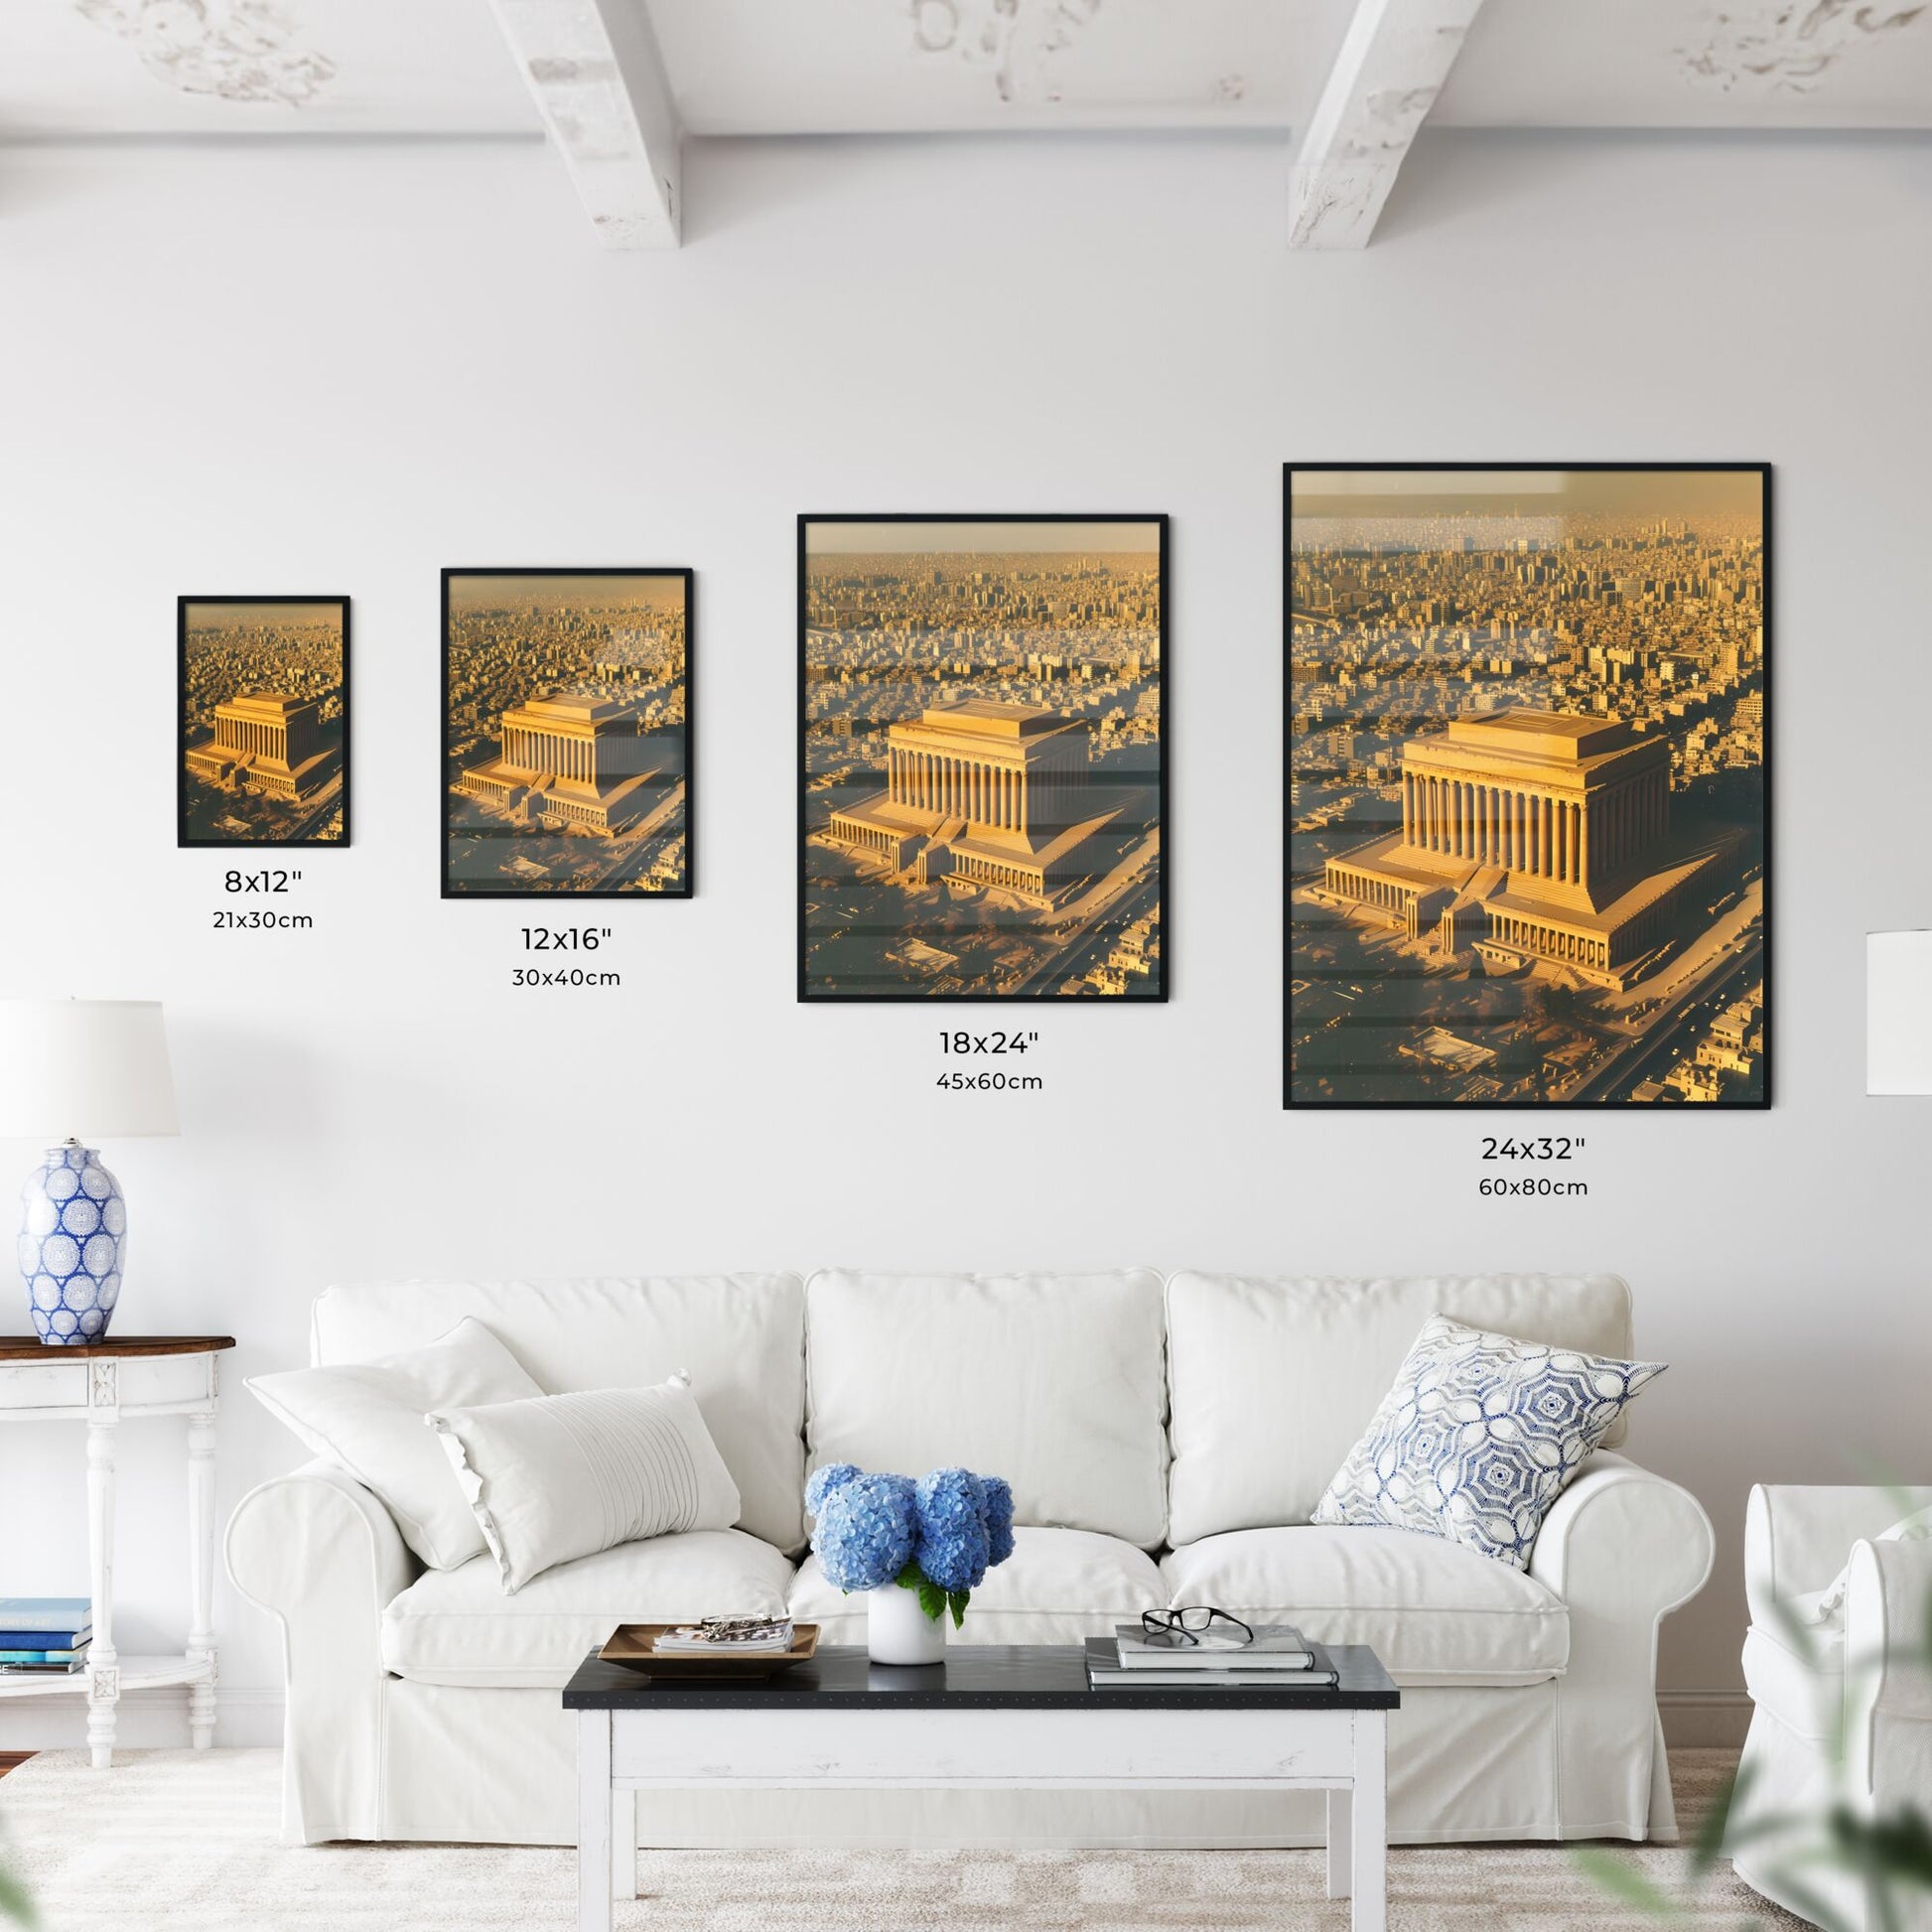 In ancient babylon, there a very wide temple structure in the middle of the walled city - Art print of a large building with columns and a large city Default Title